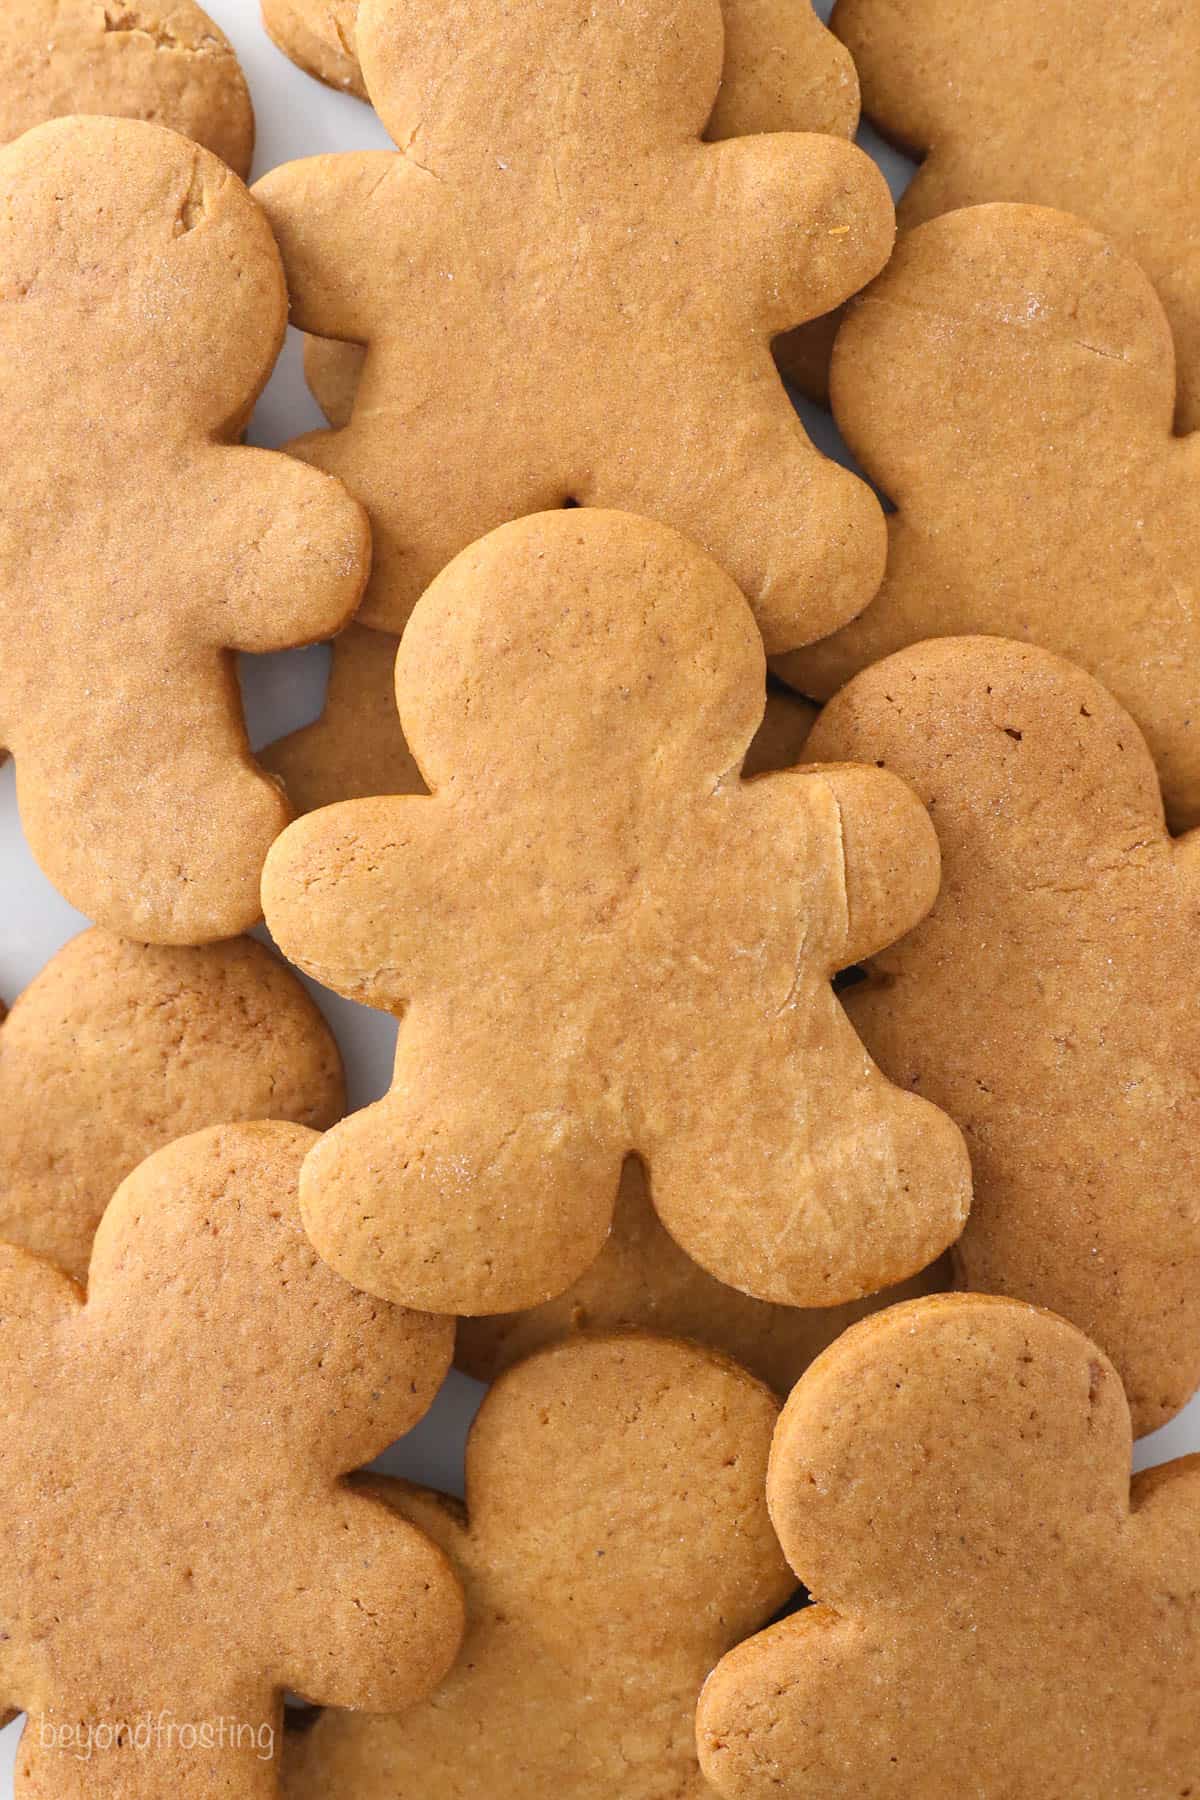 A pile of unfrosted gingerbread man cookies on top of a plain white surface